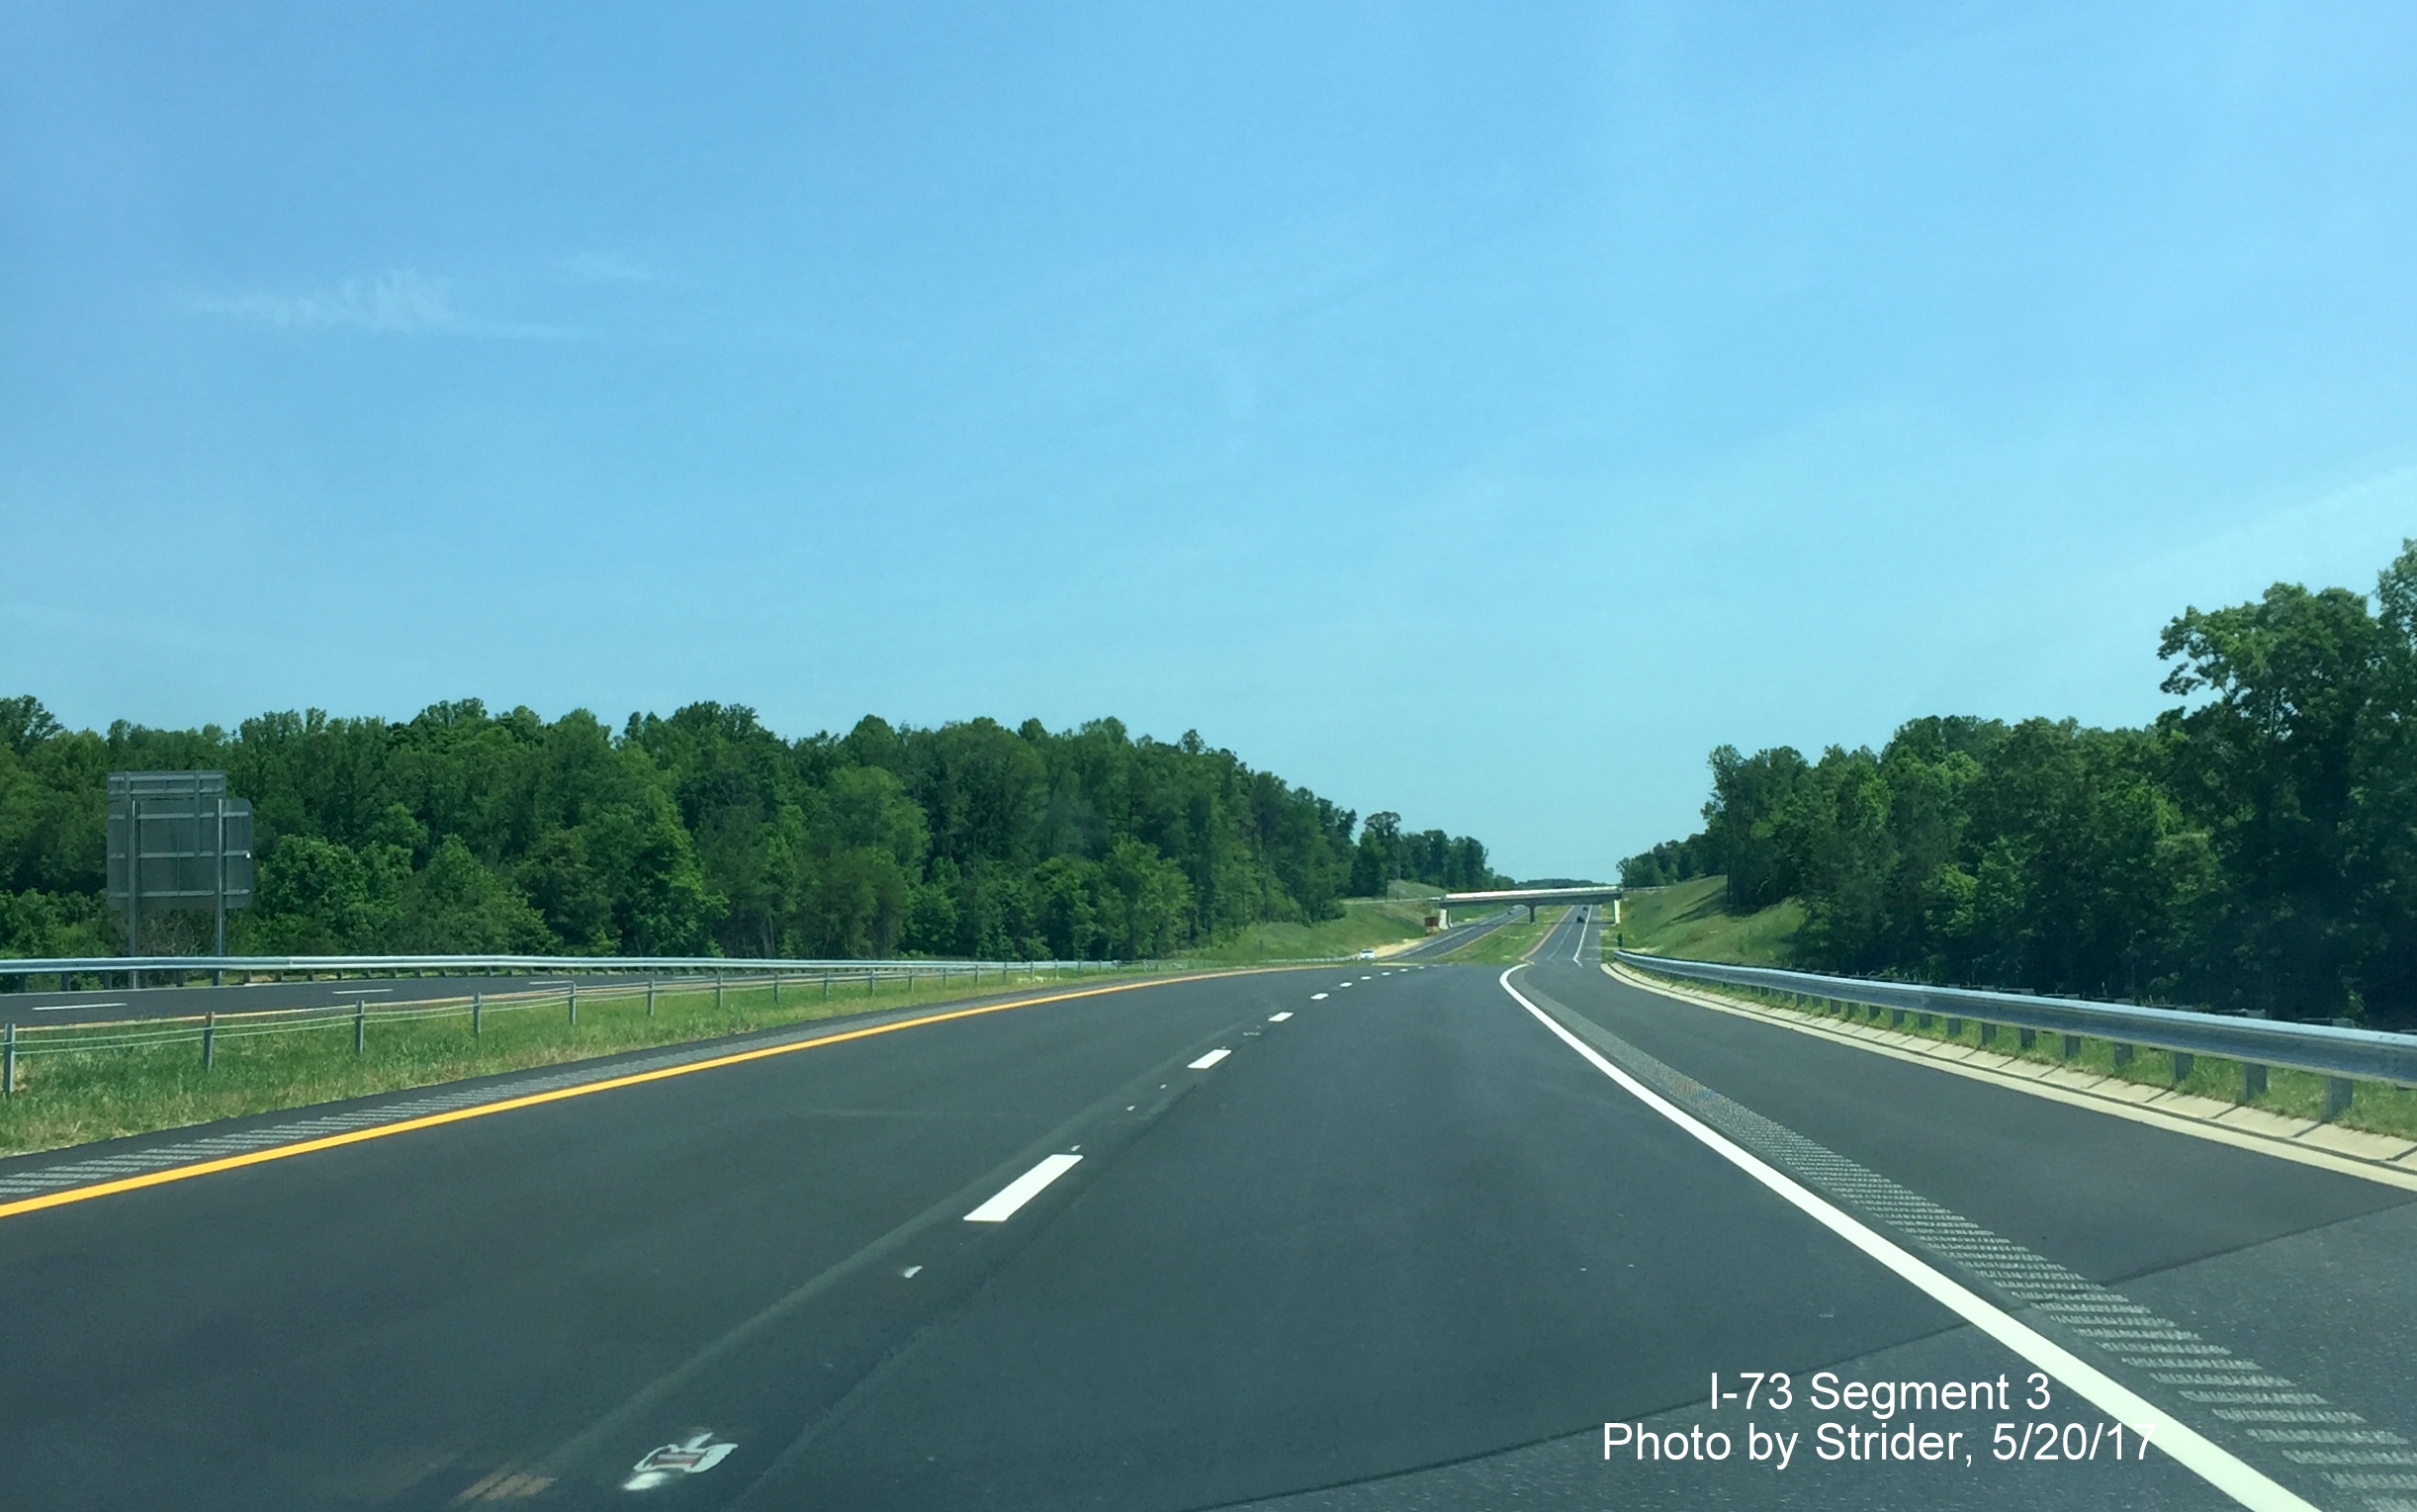 Image taken of travelling on the newly opened I-73 North between NC 68 and NC 150, by Strider